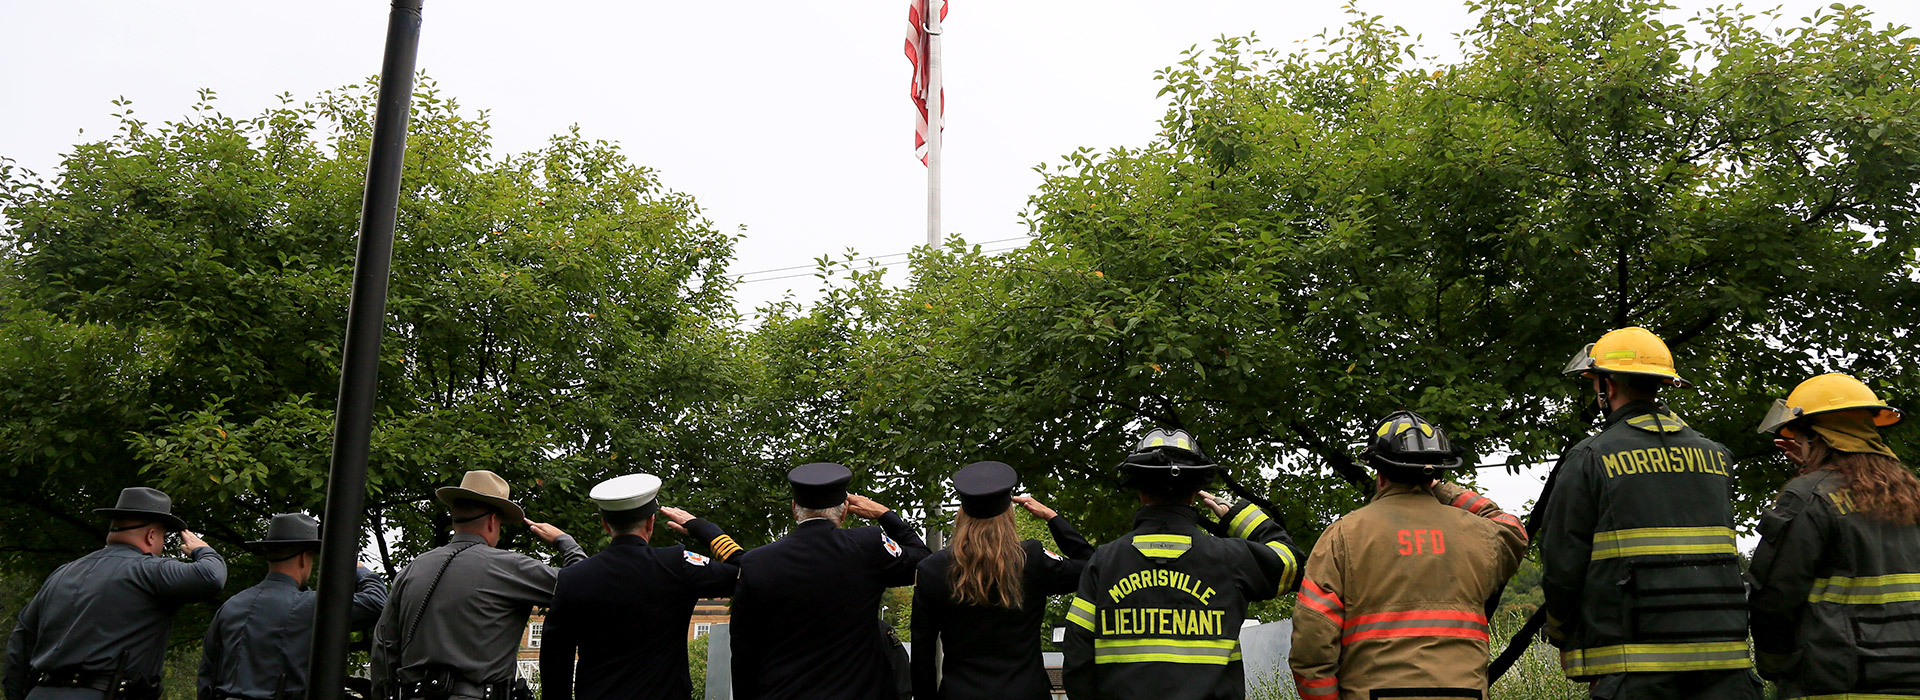 First responders salute the flag